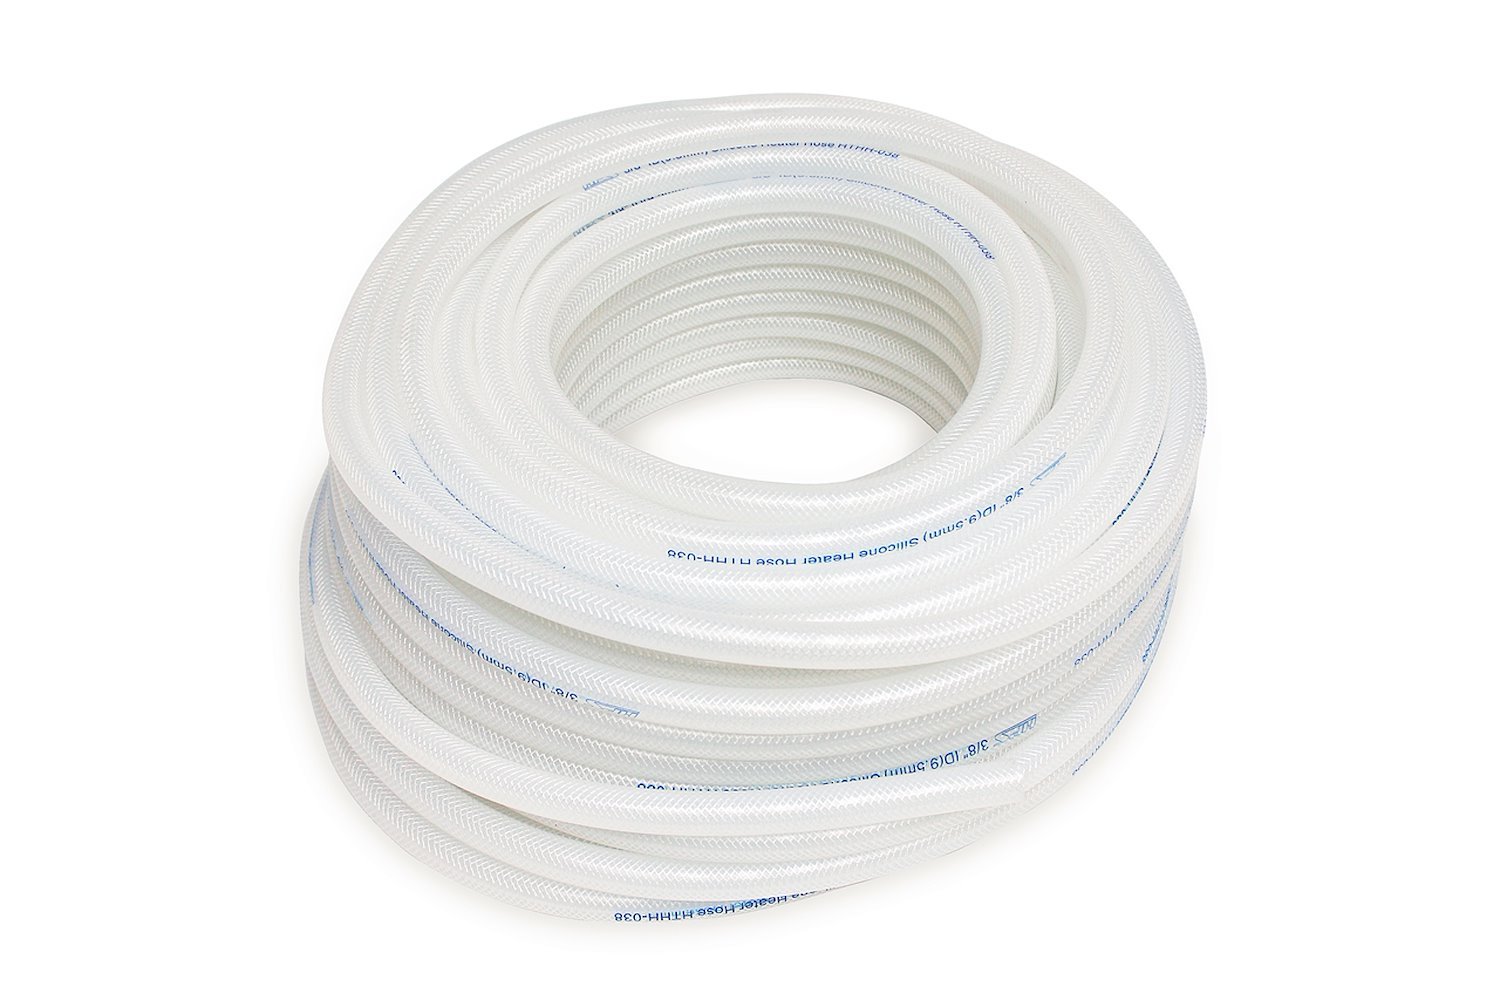 HTHH-075-CLEARx25 Silicone Heater Hose Tubing, High-Temp Reinforced, 3/4 in. ID, 25 ft. Roll, Clear